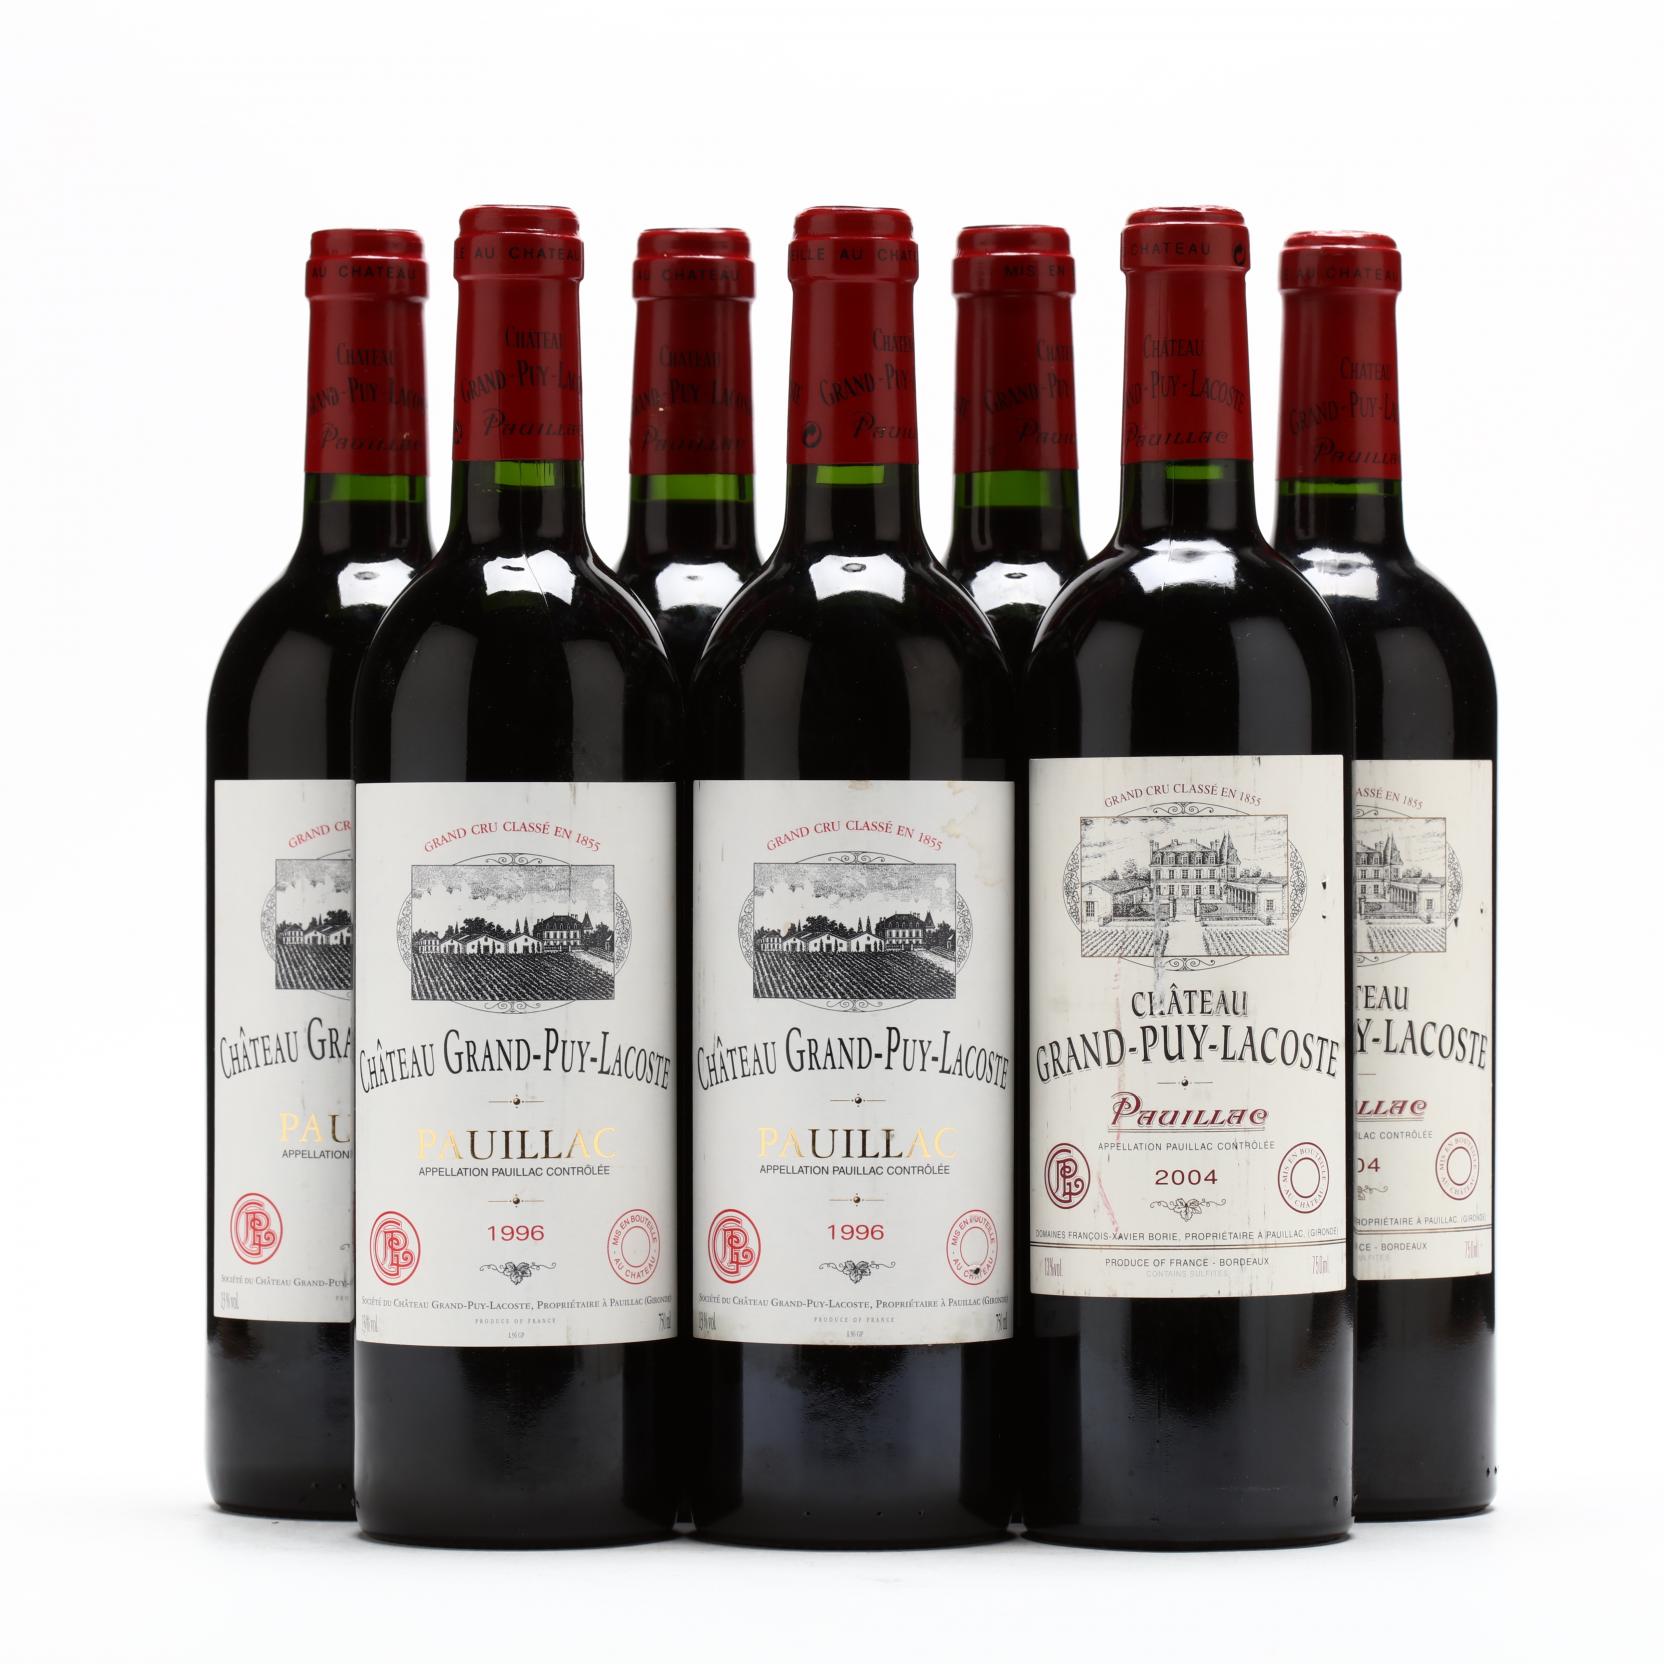 Forurenet Bule efterklang 1996 & 2004 Chateau Grand Puy Lacoste (Lot 5654 - Single-Owner Wine  Collection of the late Richard C. Siskey and Diane Siskey presented by Iron  Horse Auction Co. and Leland Little AuctionsSep 22, 2017, 10:00am)